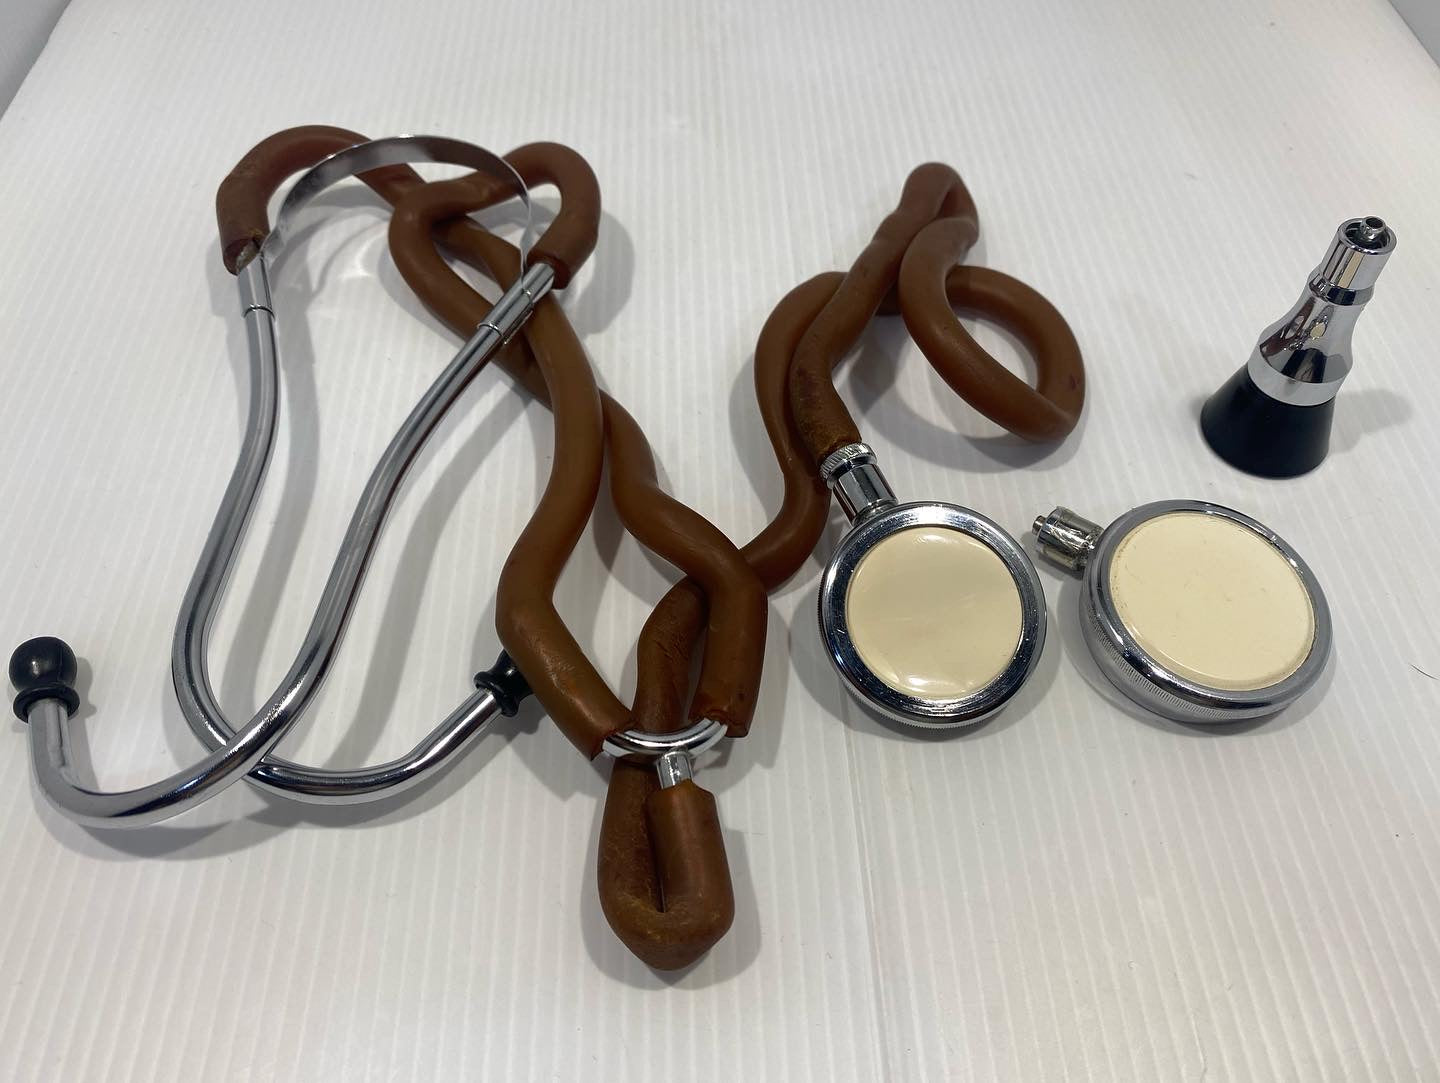 Antique German stethoscope from the 1930s made by Erka with original leather case.